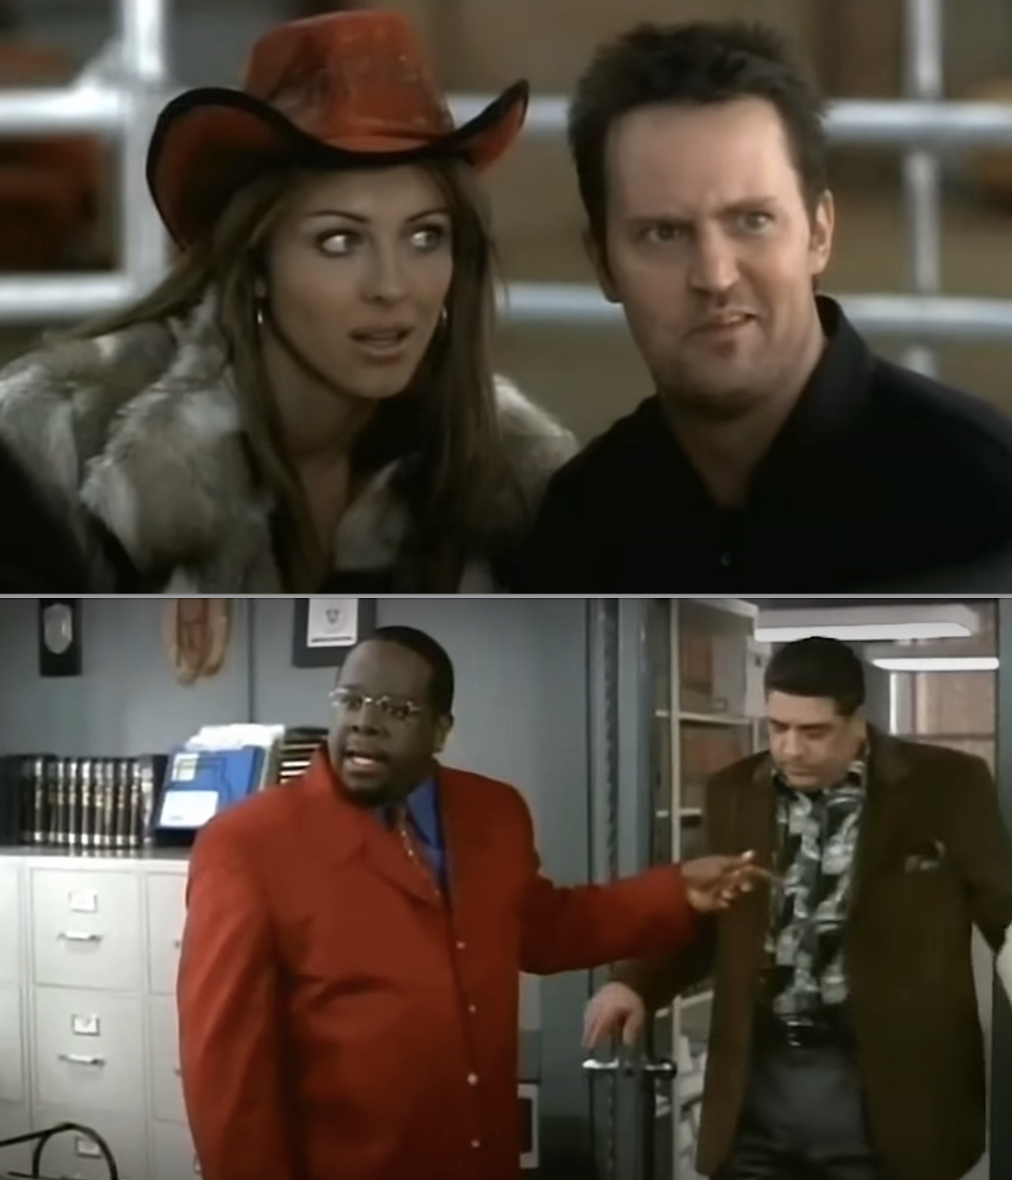 Matthew Perry, Elizabeth Hurley, and Cedric the Entertainer in the movie